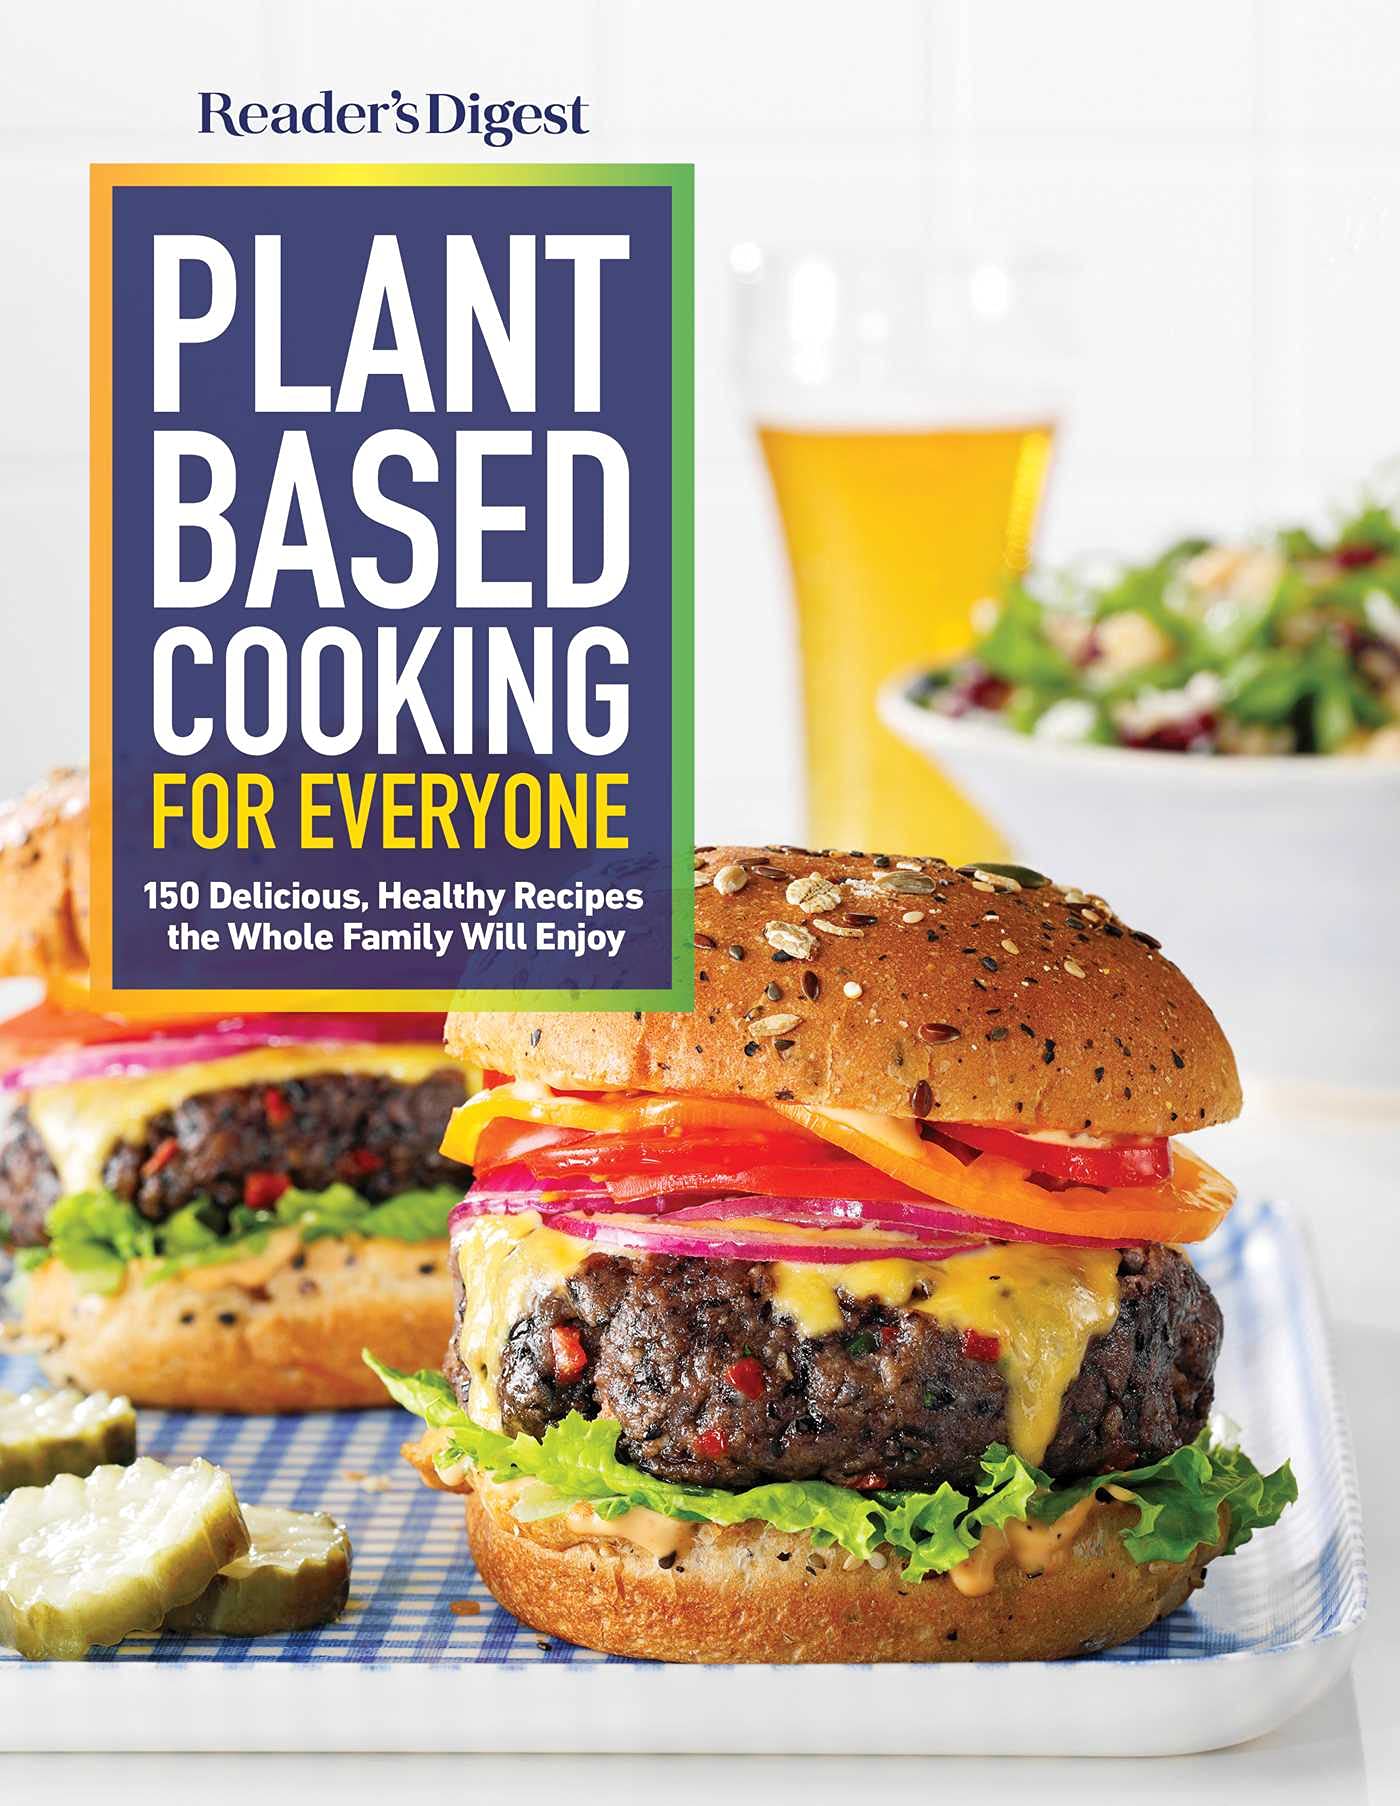 Reader's Digest Plant Based Cooking for Everyone - SureShot Books Publishing LLC